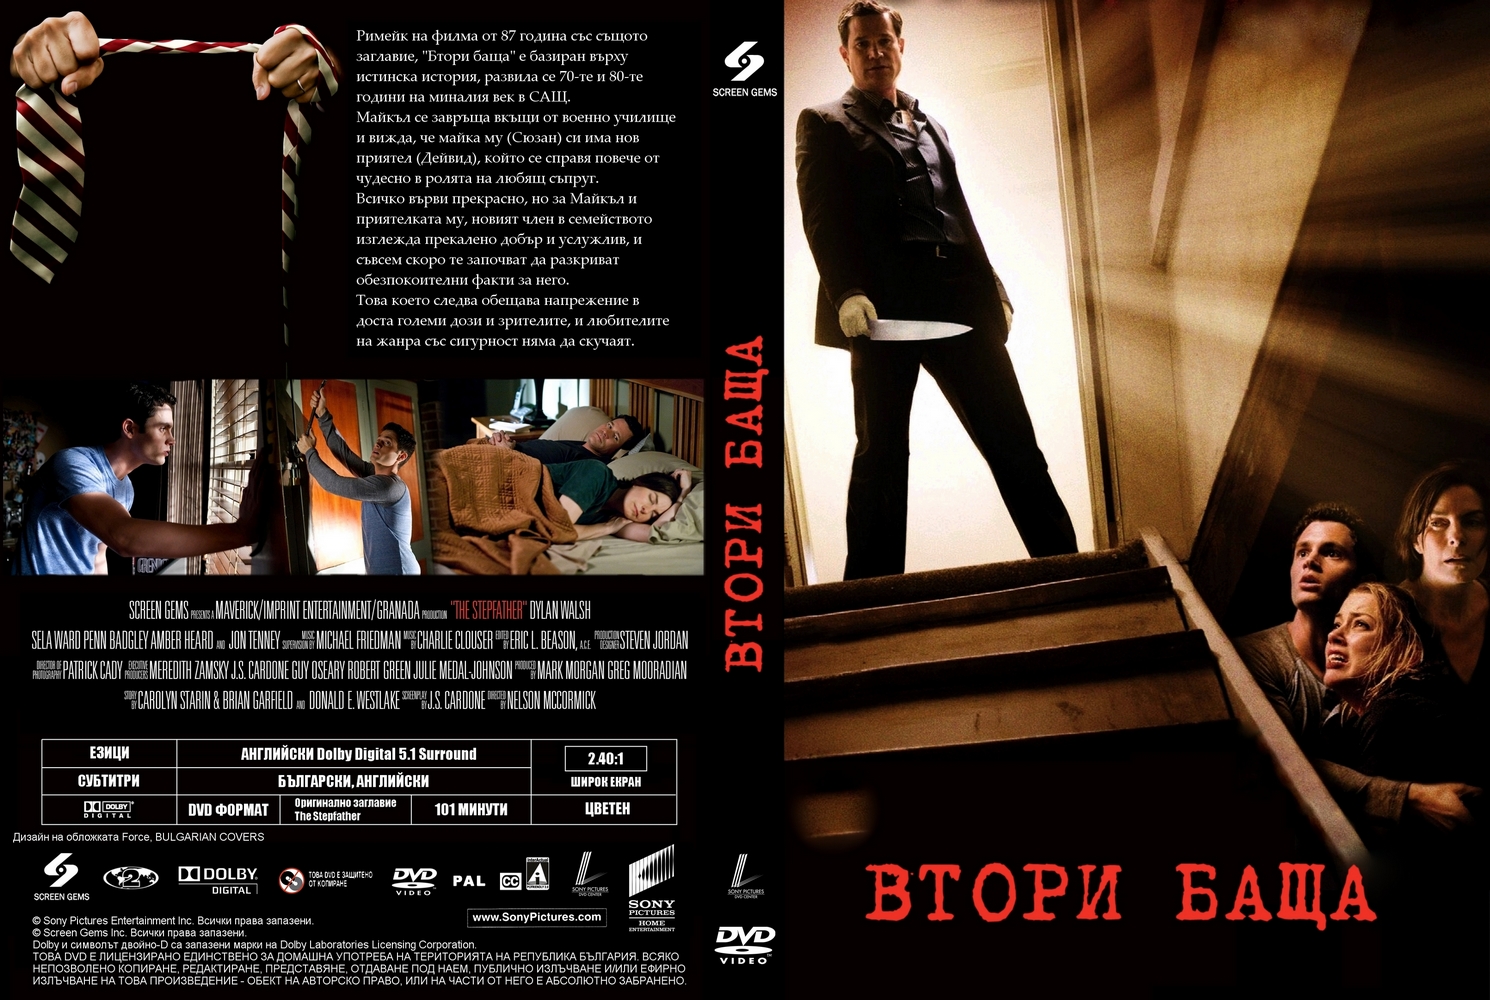 The Stepfather (2009) - R1 Custom DVD Cover.